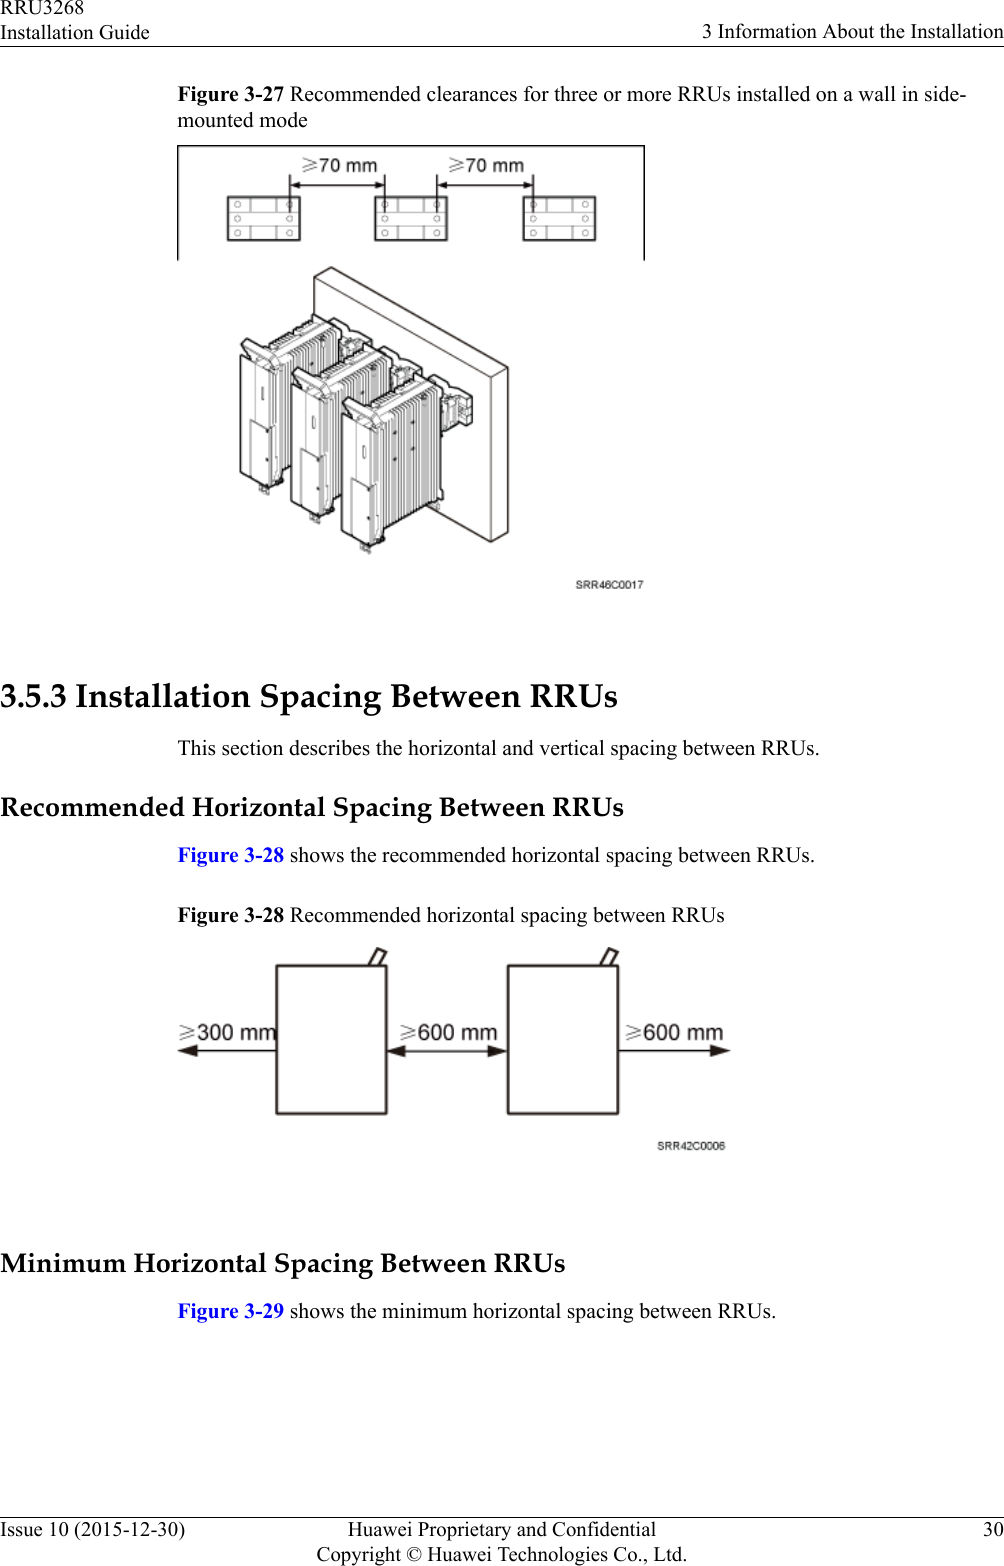 Figure 3-27 Recommended clearances for three or more RRUs installed on a wall in side-mounted mode 3.5.3 Installation Spacing Between RRUsThis section describes the horizontal and vertical spacing between RRUs.Recommended Horizontal Spacing Between RRUsFigure 3-28 shows the recommended horizontal spacing between RRUs.Figure 3-28 Recommended horizontal spacing between RRUs Minimum Horizontal Spacing Between RRUsFigure 3-29 shows the minimum horizontal spacing between RRUs.RRU3268Installation Guide 3 Information About the InstallationIssue 10 (2015-12-30) Huawei Proprietary and ConfidentialCopyright © Huawei Technologies Co., Ltd.30